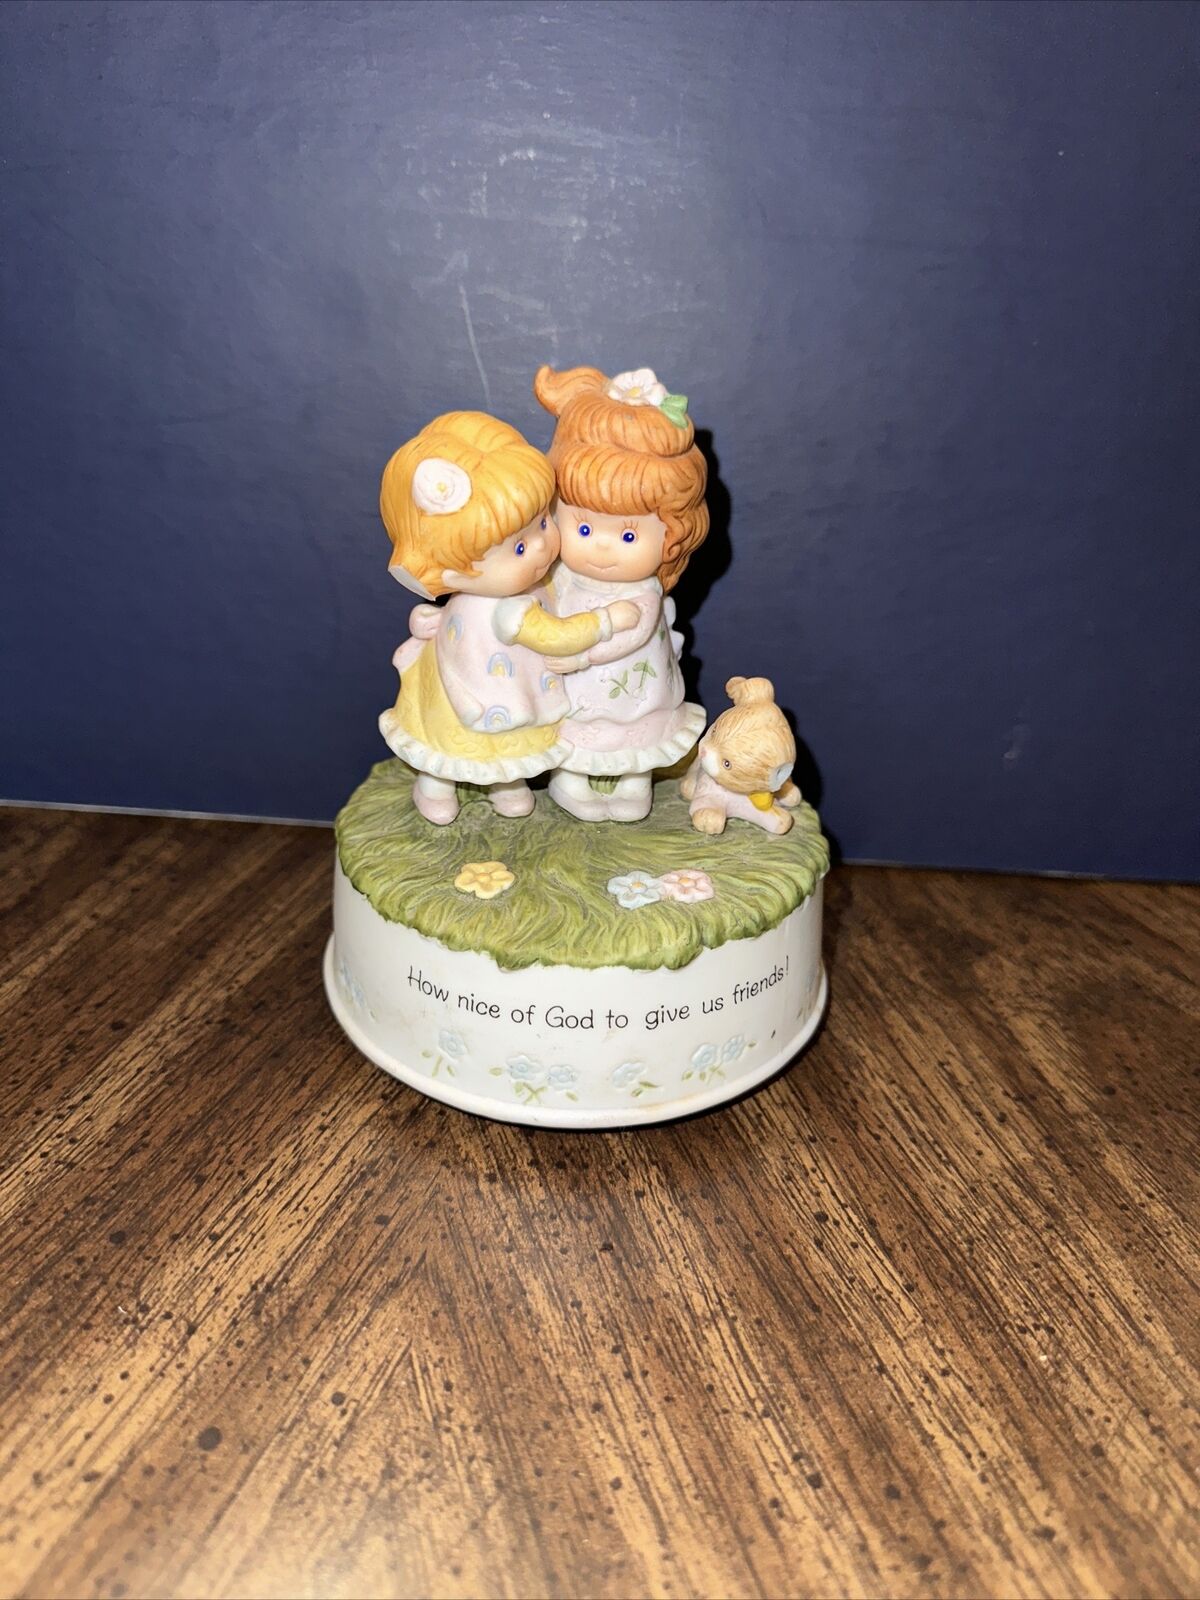 1989 Music Box Porcelain Special Blessings “How Nice of God to Give Us Friends\